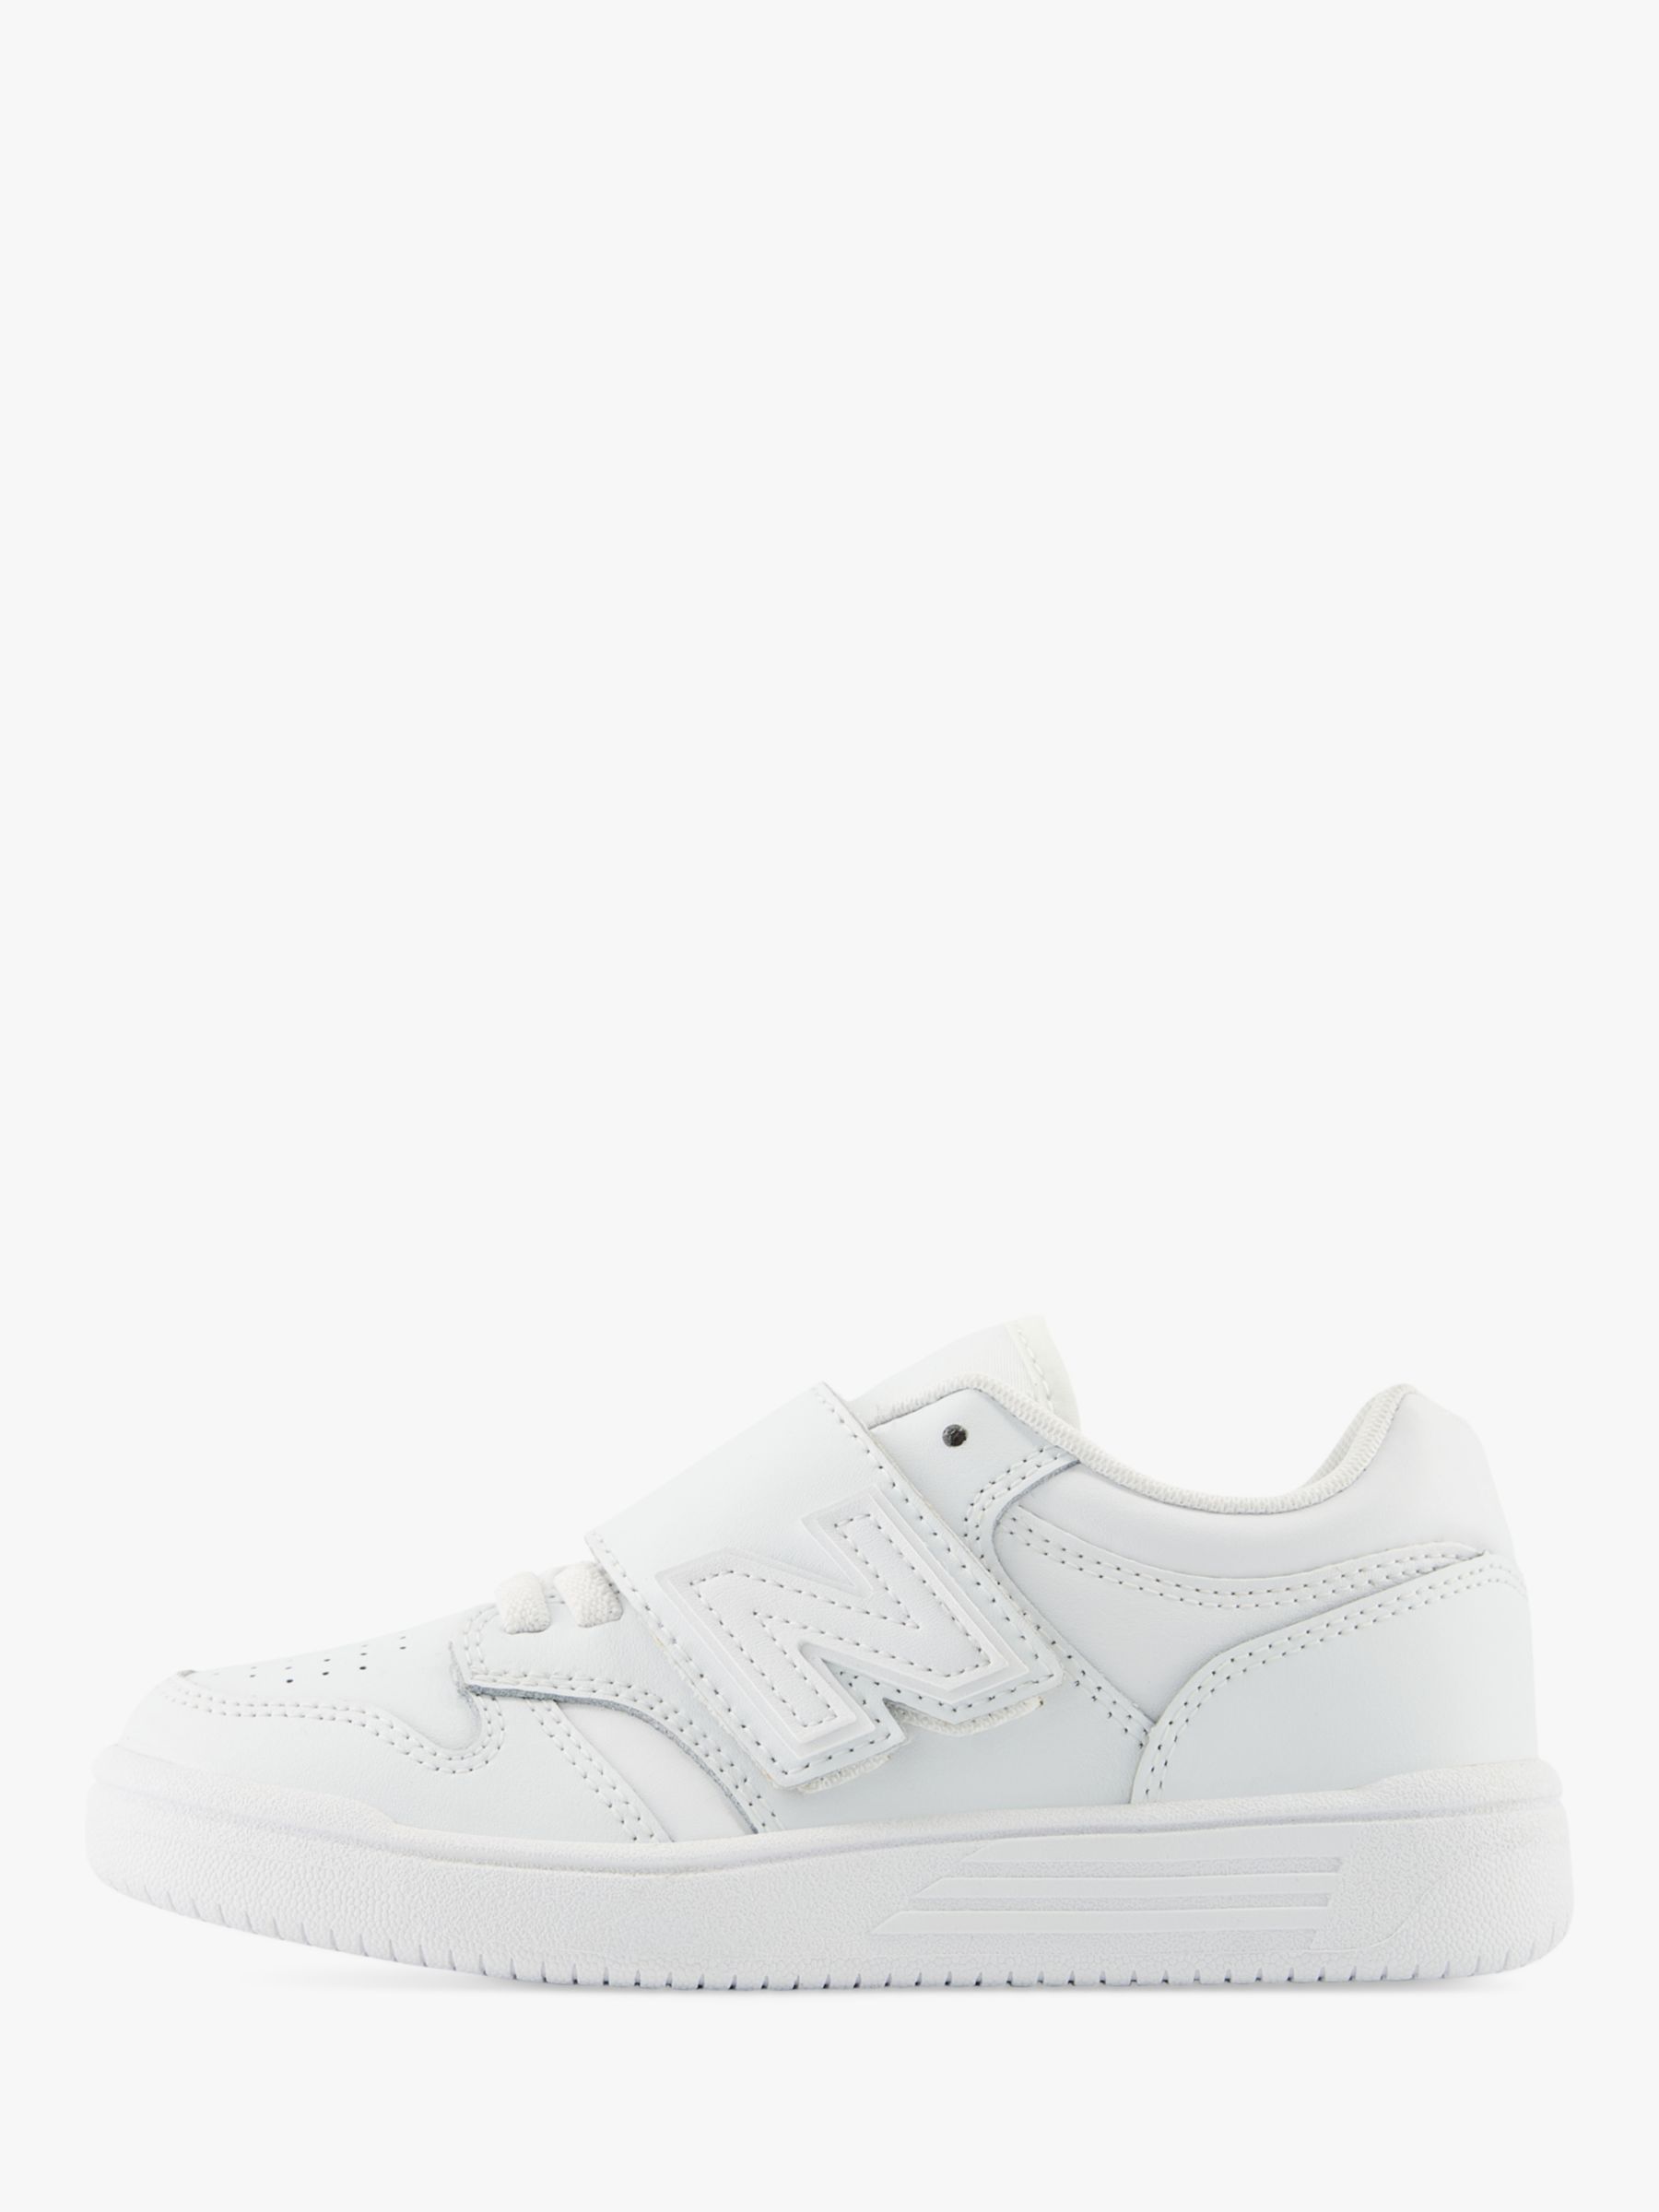 Buy New Balance Kids' 480 Bungee Lace Trainers Online at johnlewis.com